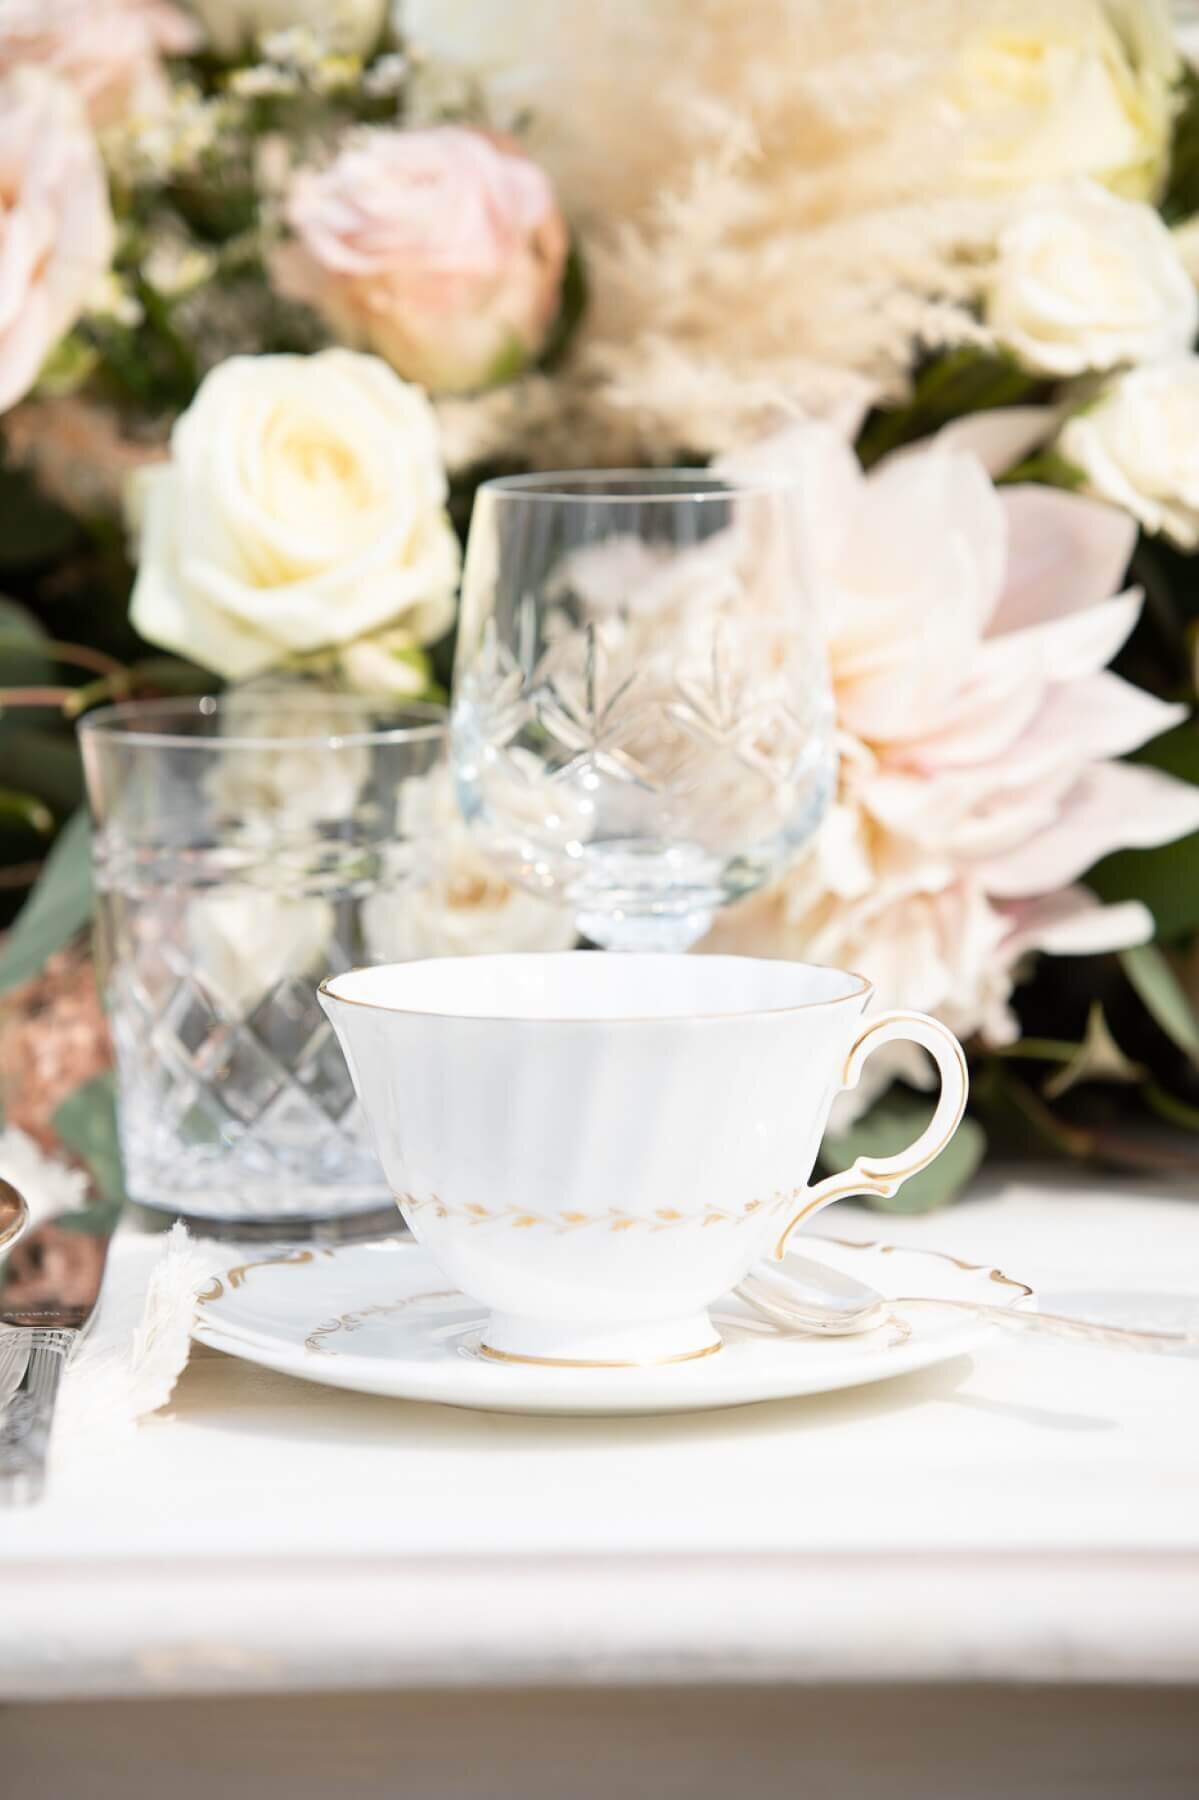 Classic white china tea cup with gold detailing